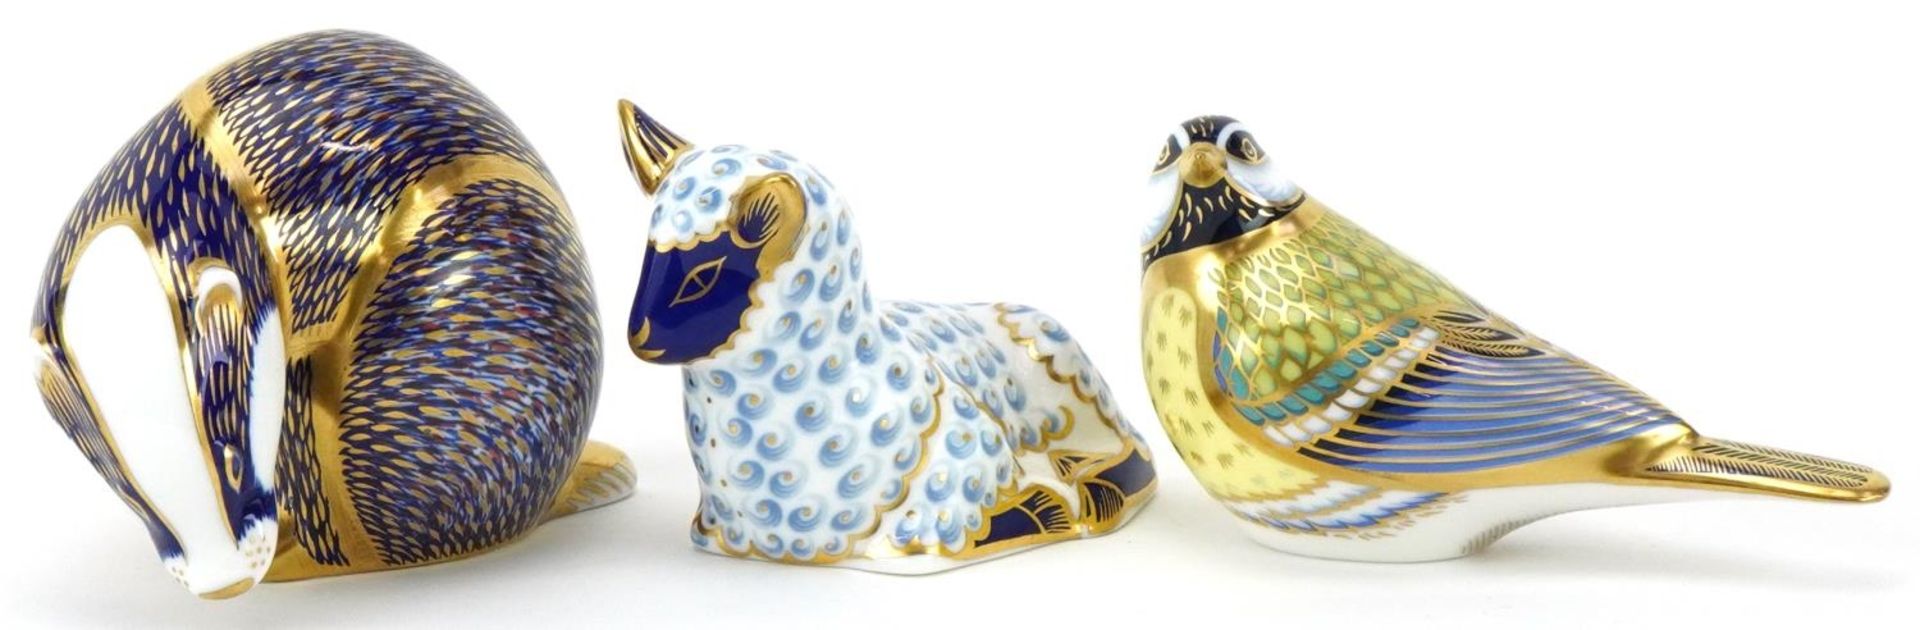 Royal Crown Derby Great Tit, Lamb and Badger paperweights with gold stoppers, the largest 11cm in